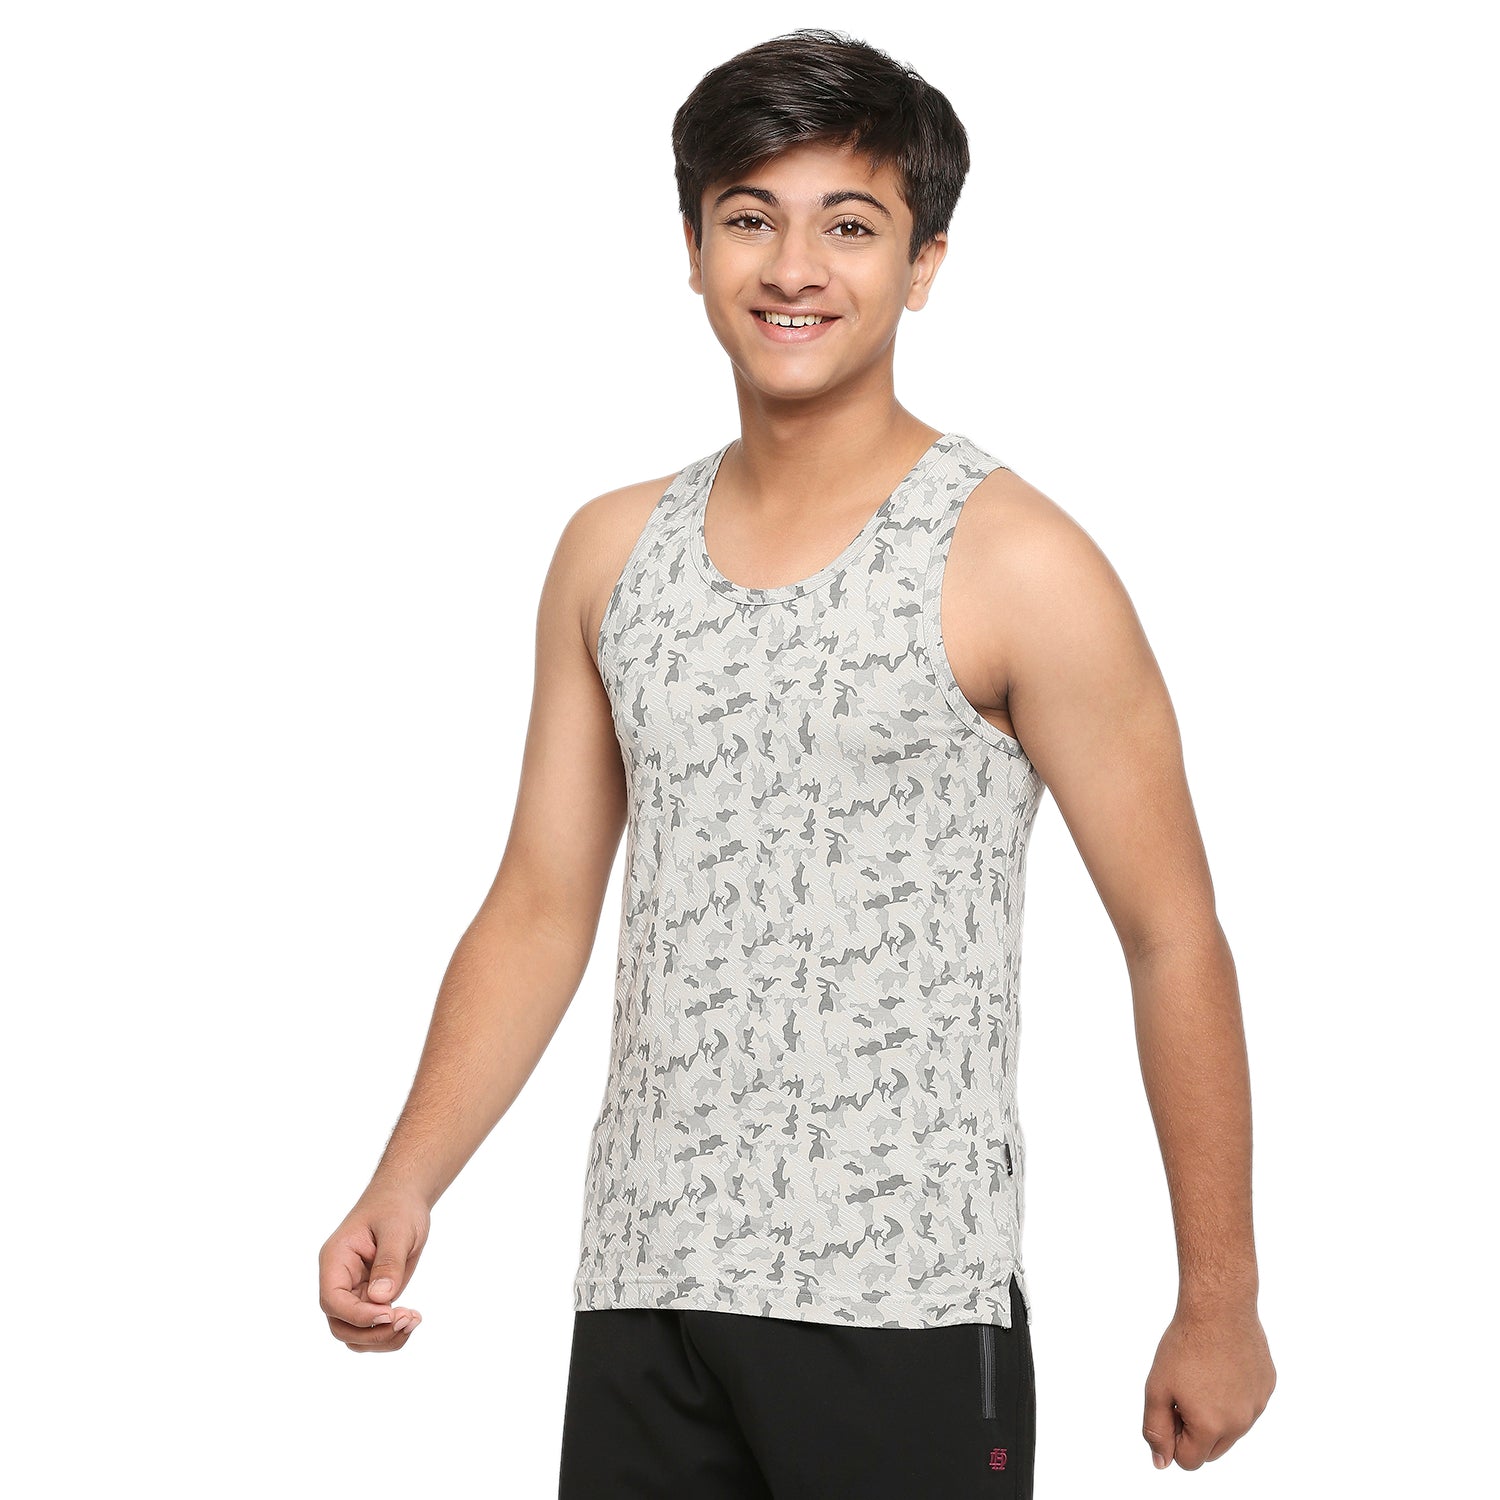 Frenchie U-19 Teens Light Gray Vest in Camouflage Print